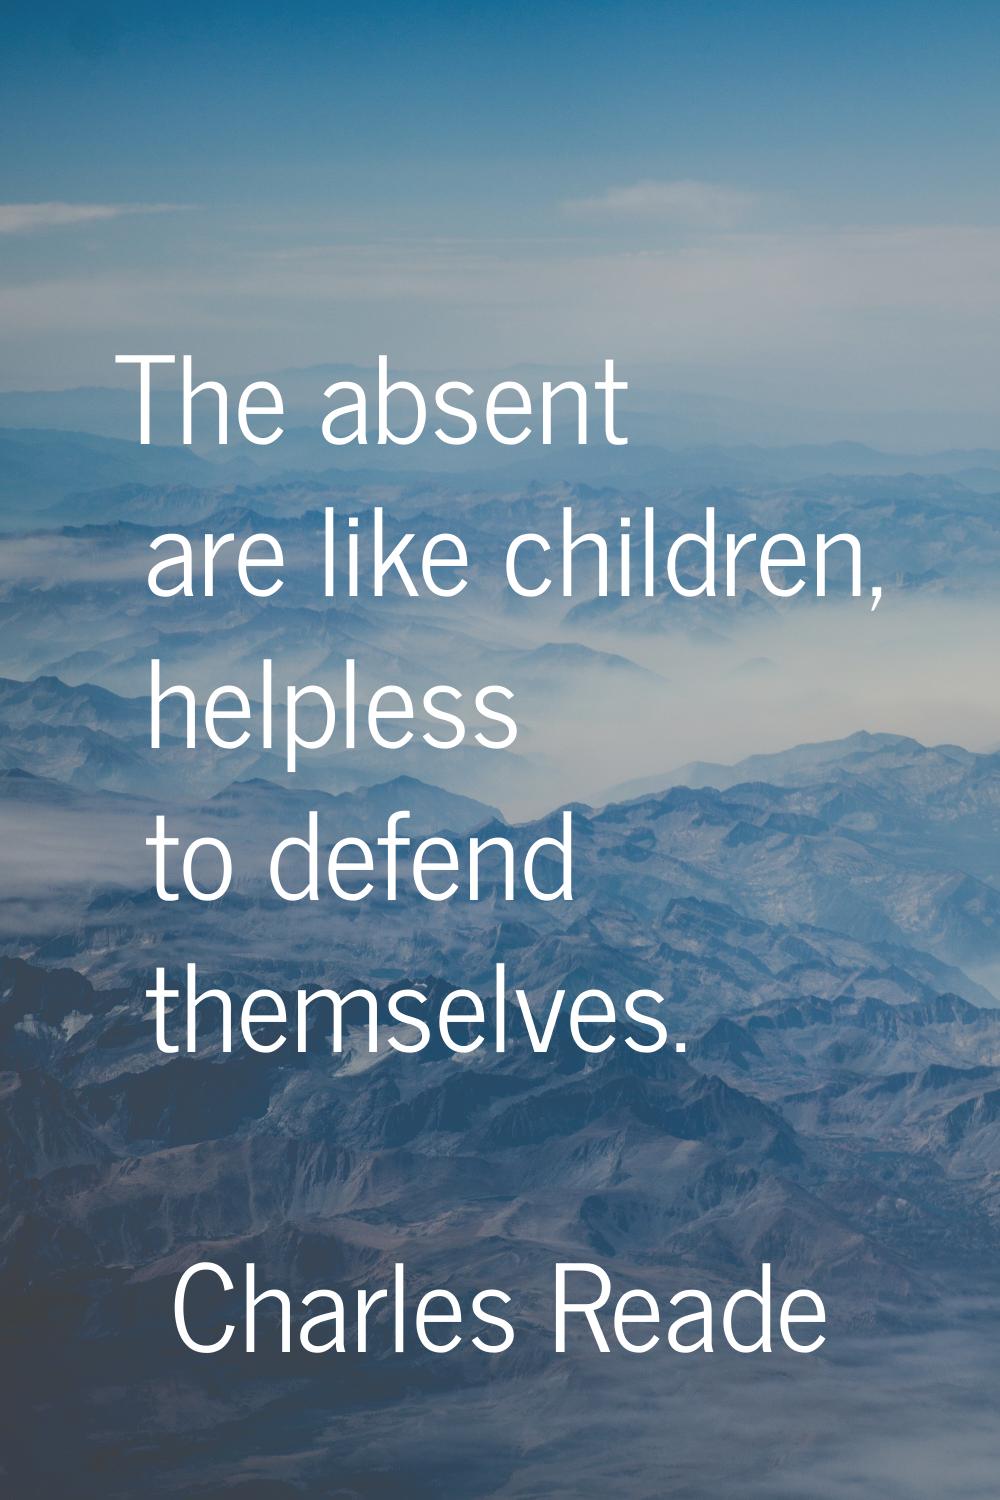 The absent are like children, helpless to defend themselves.